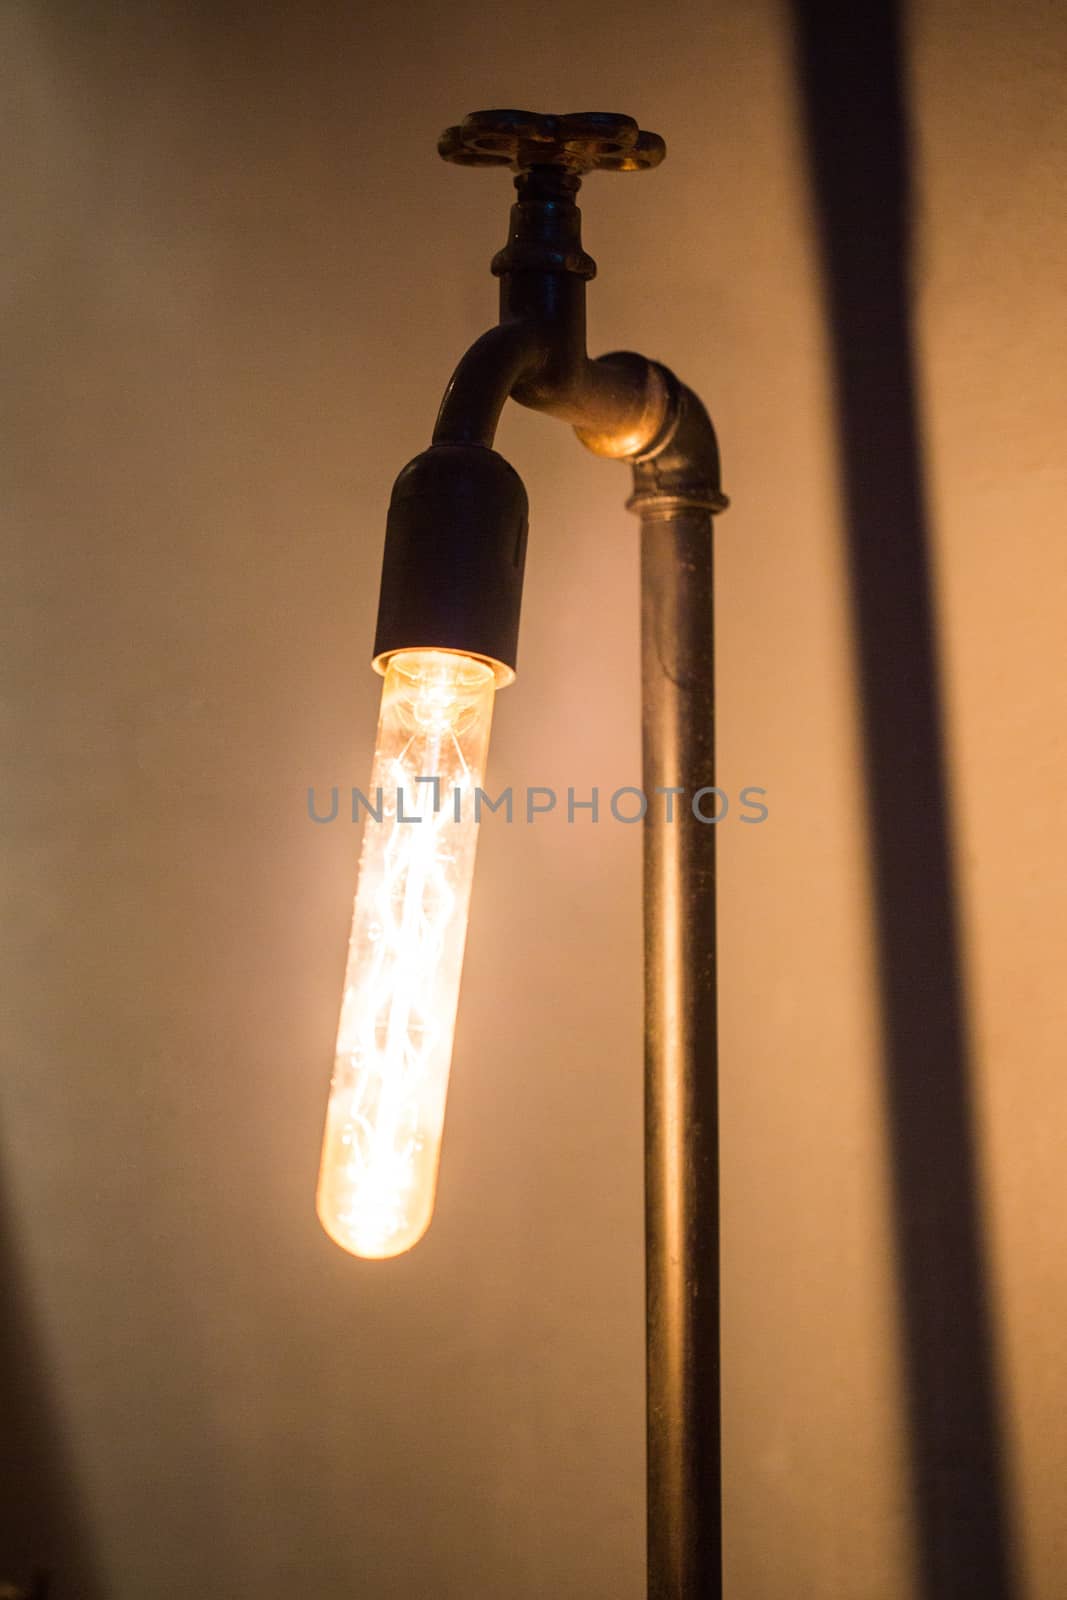 incandescent light built into the faucet by boys1983@mail.ru